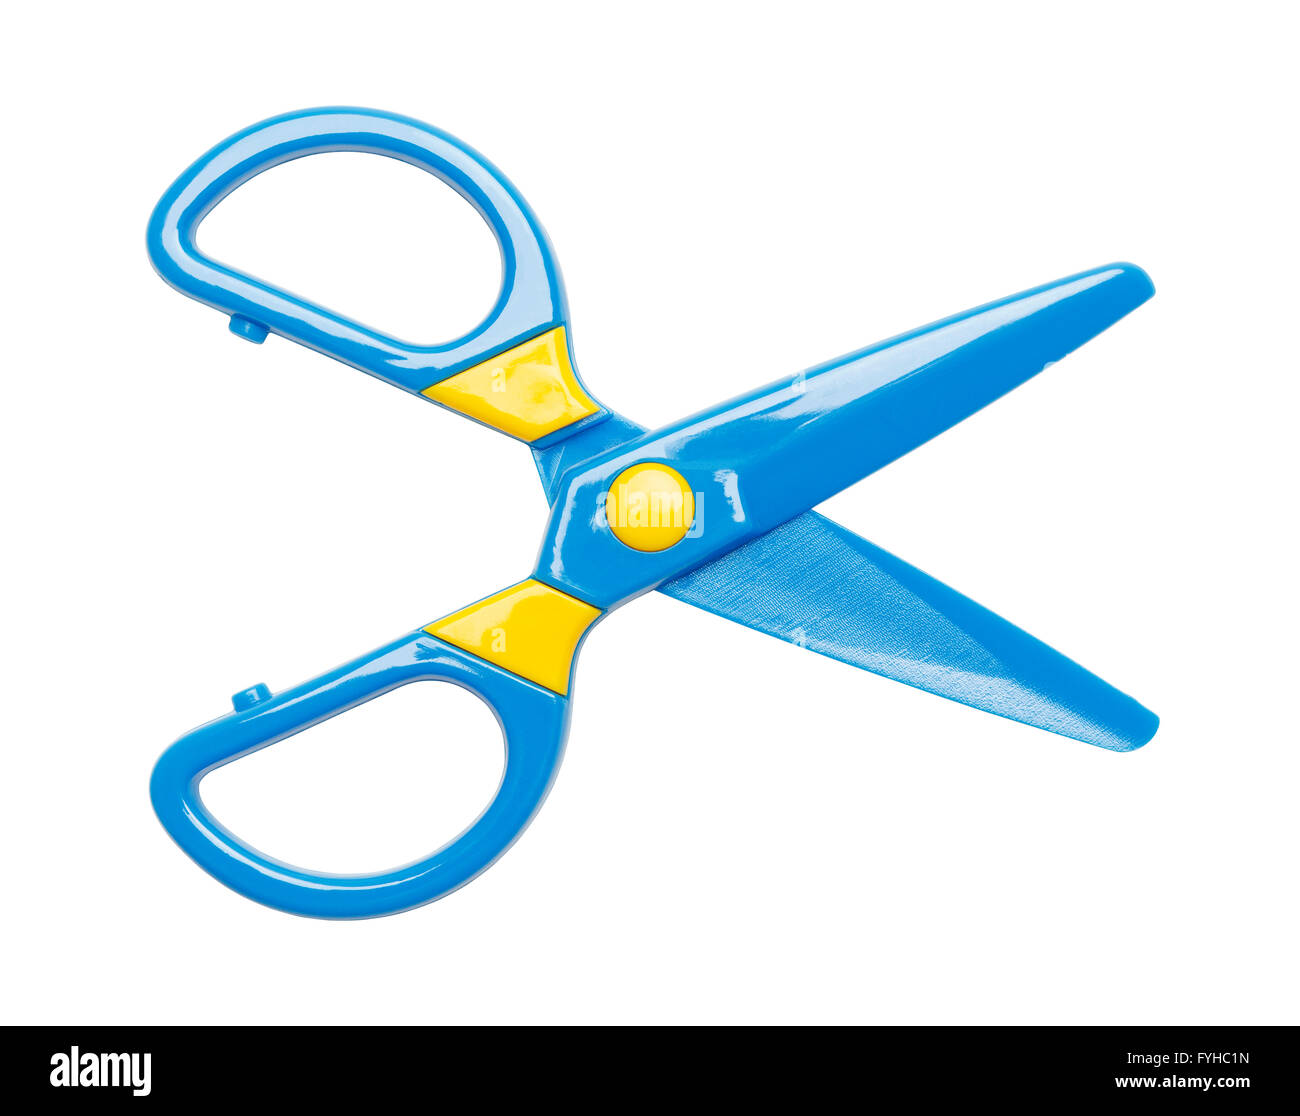 https://c8.alamy.com/comp/FYHC1N/blue-and-yellow-plastic-scissors-isolated-on-white-background-FYHC1N.jpg